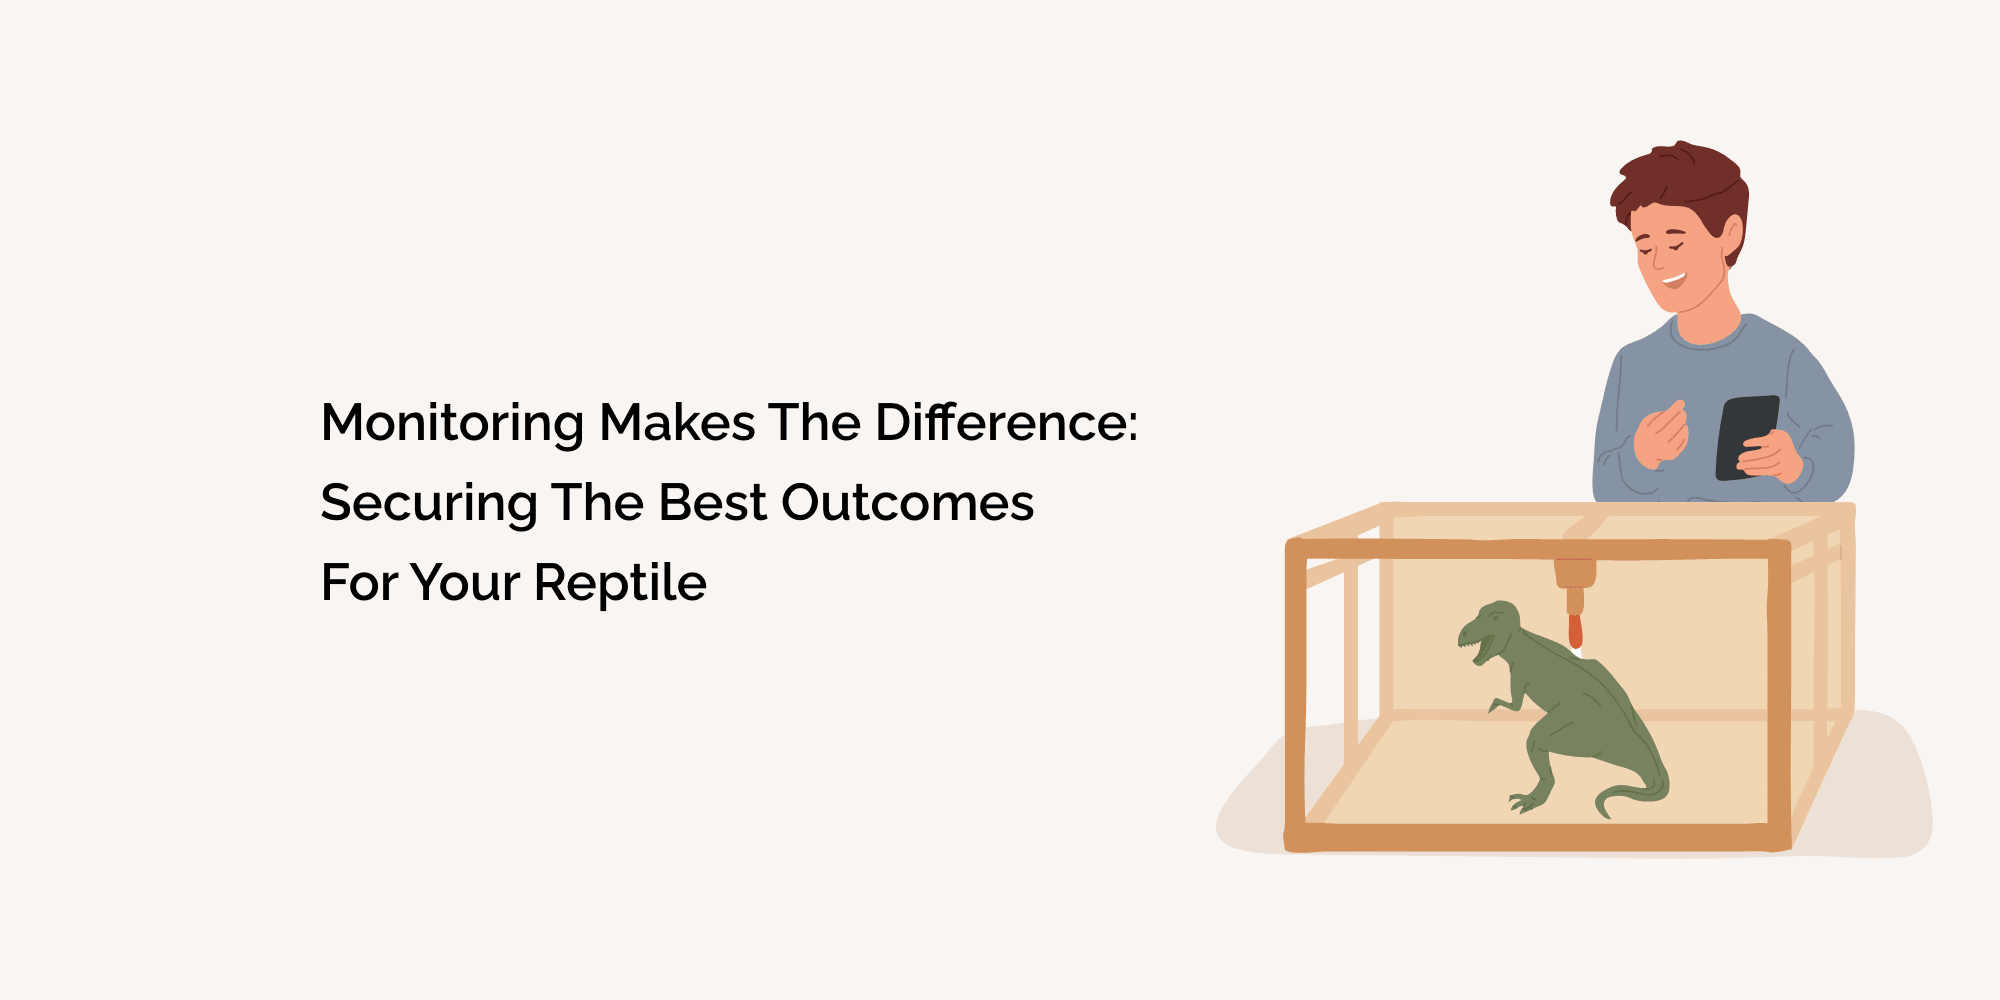 Monitoring Makes the Difference: Securing the Best Outcomes for Your Reptile